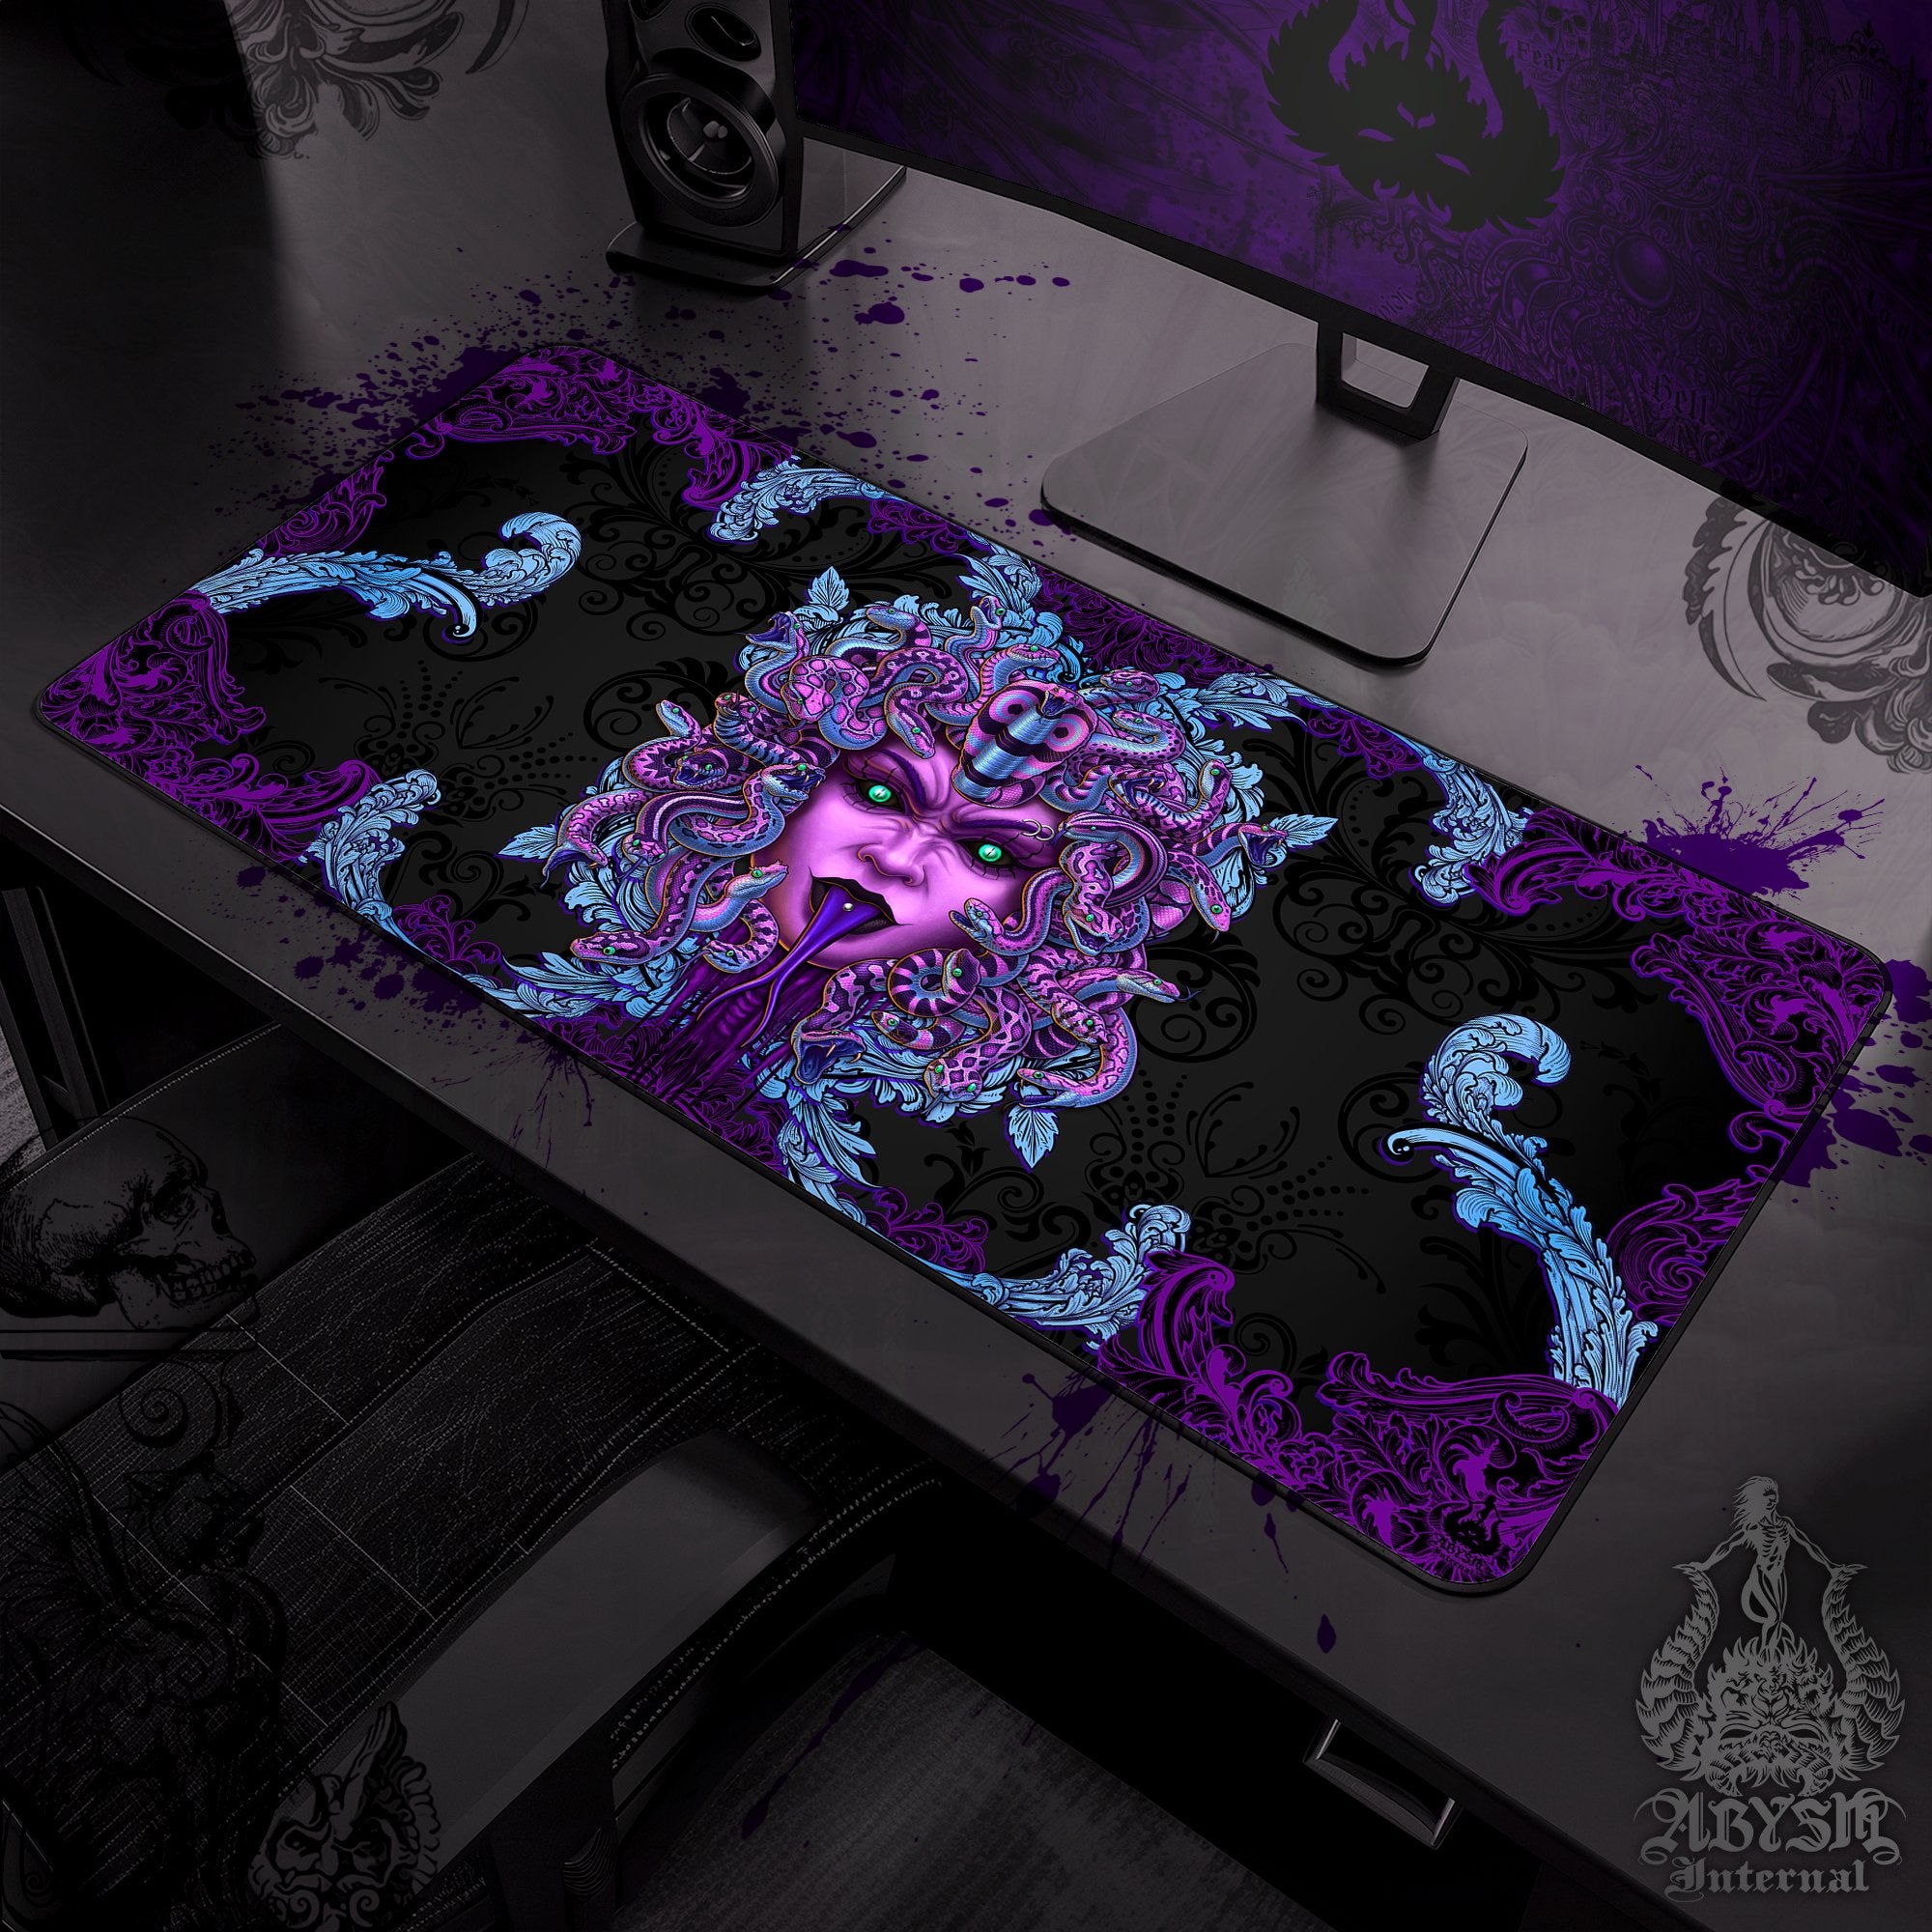 Whimsigoth Mouse Pad, Pastel Goth Gaming Desk Mat, Medusa Skull Workpad, Witchy Gamer Table Protector Cover, Dark Fantasy Art Print - 2 Options - Abysm Internal